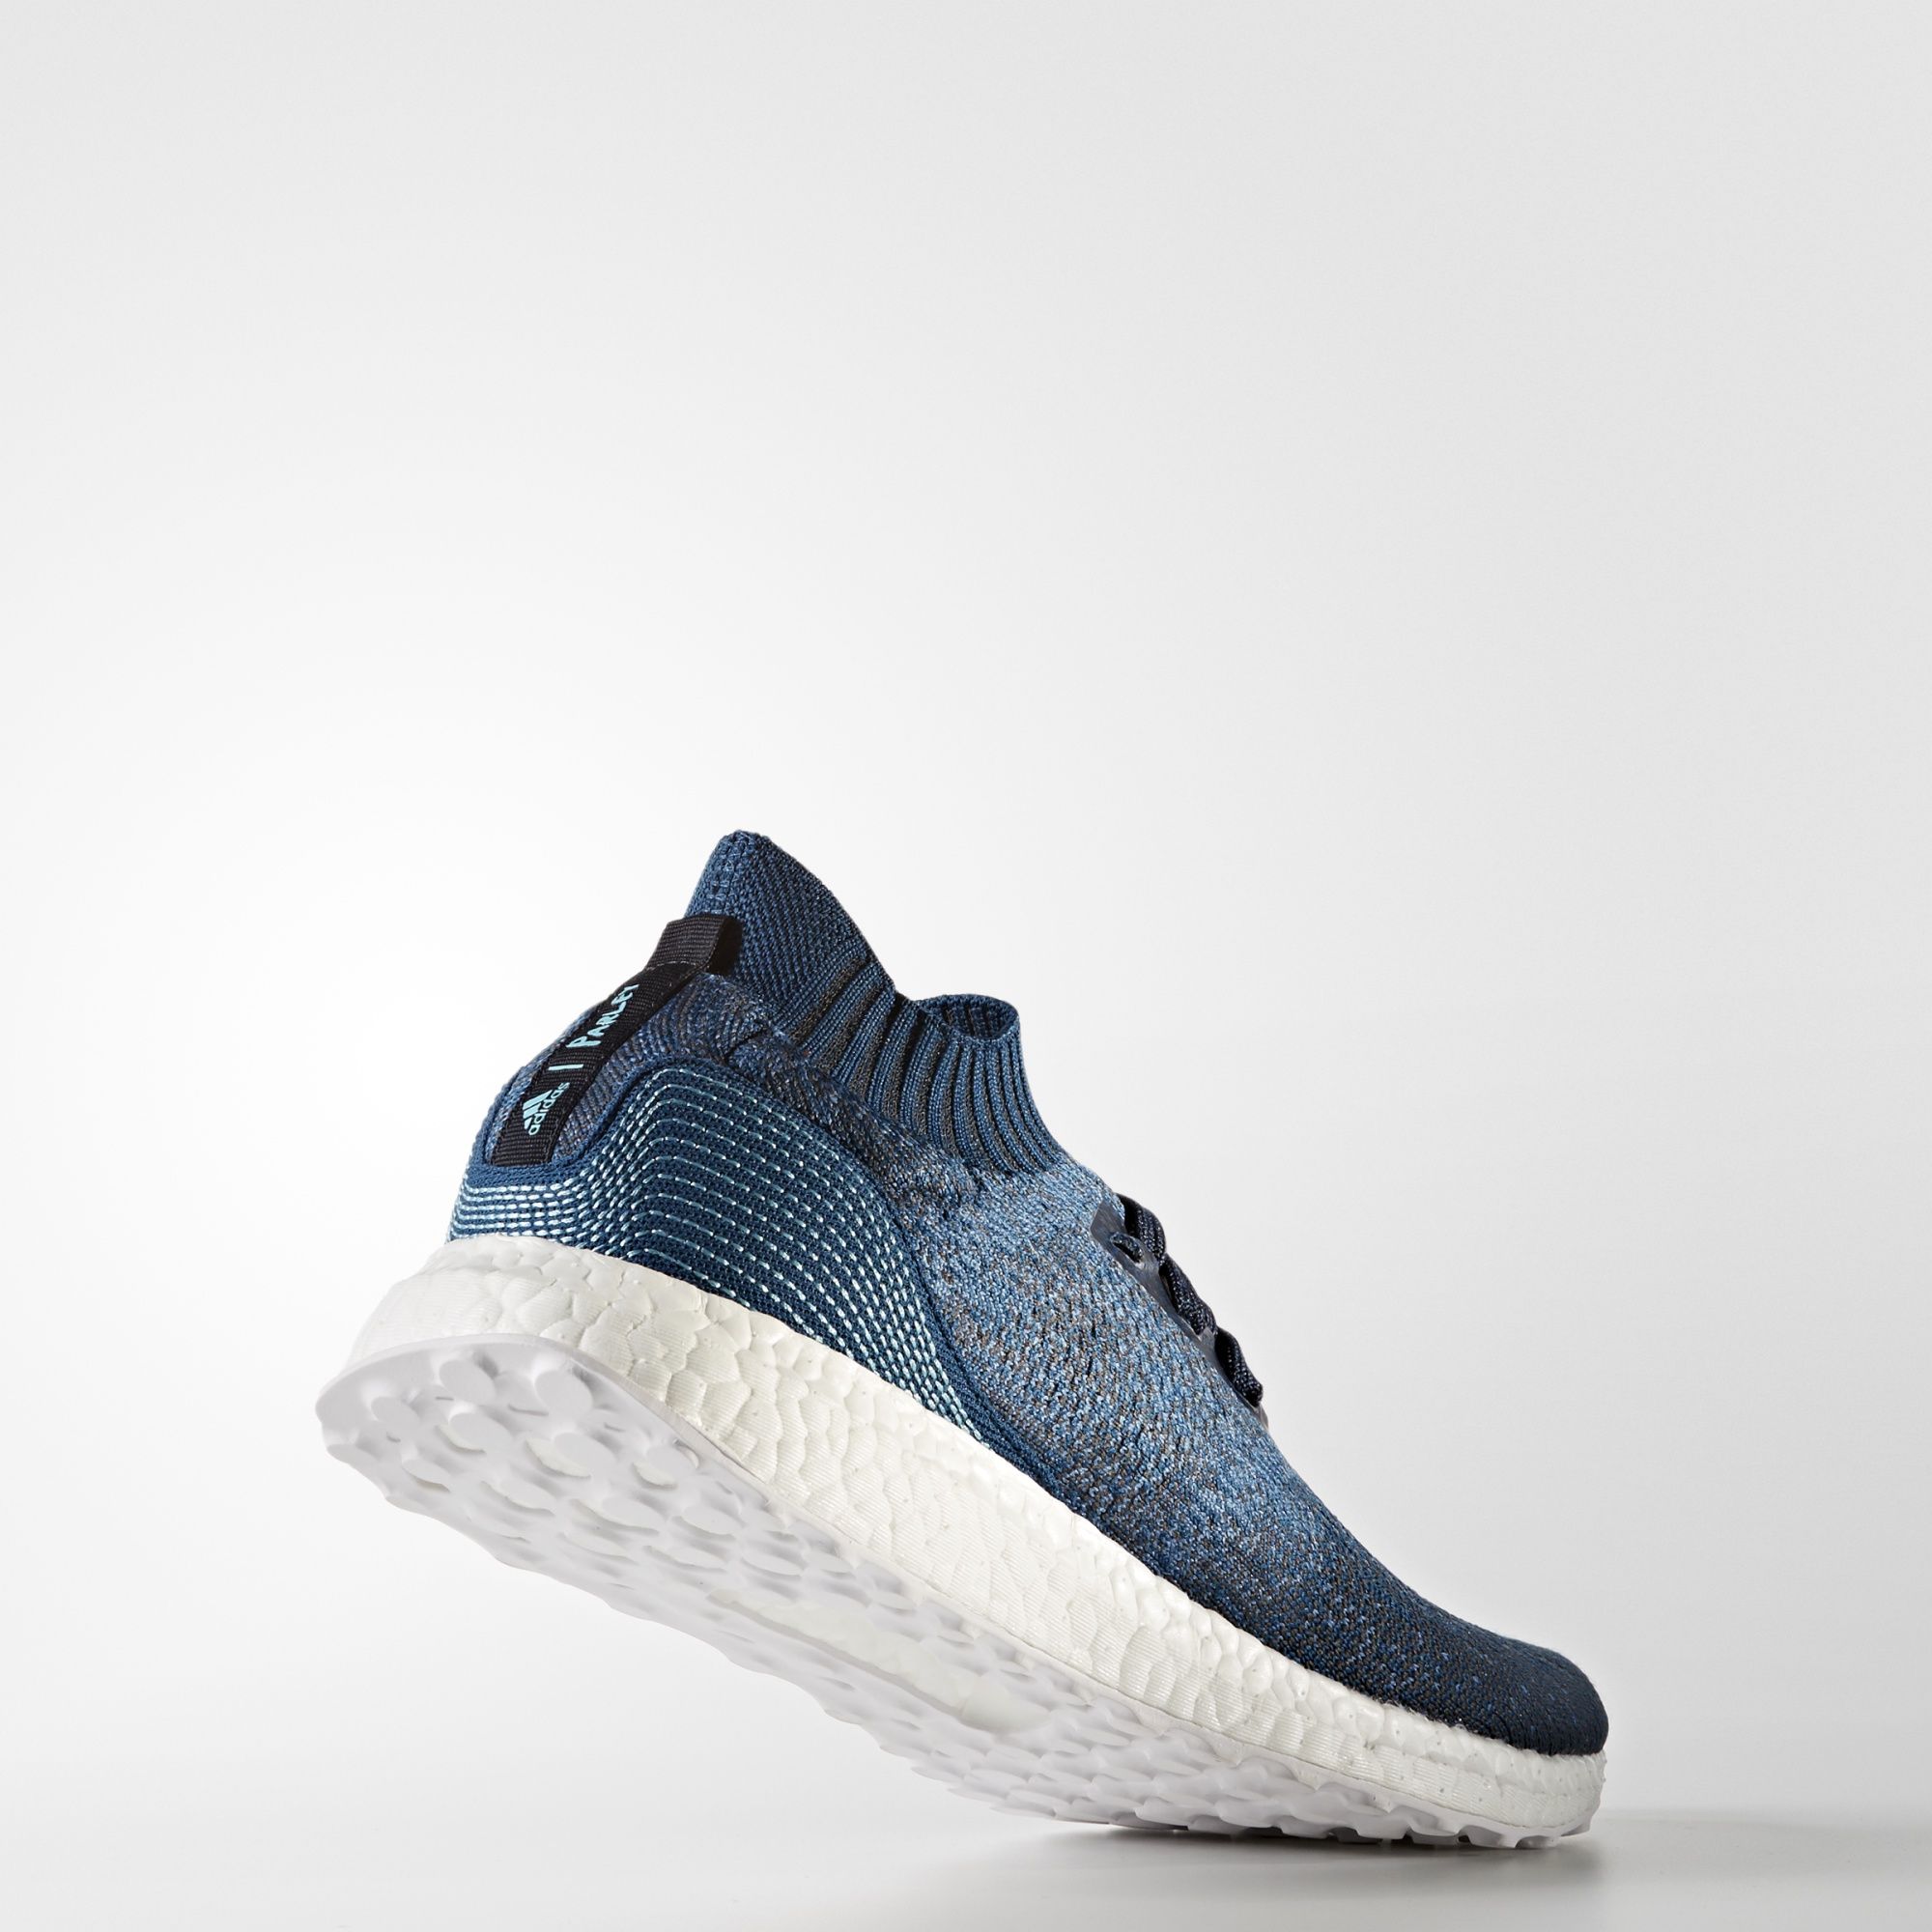 Adidas Ultra Boost Uncaged Parley
Blue / White